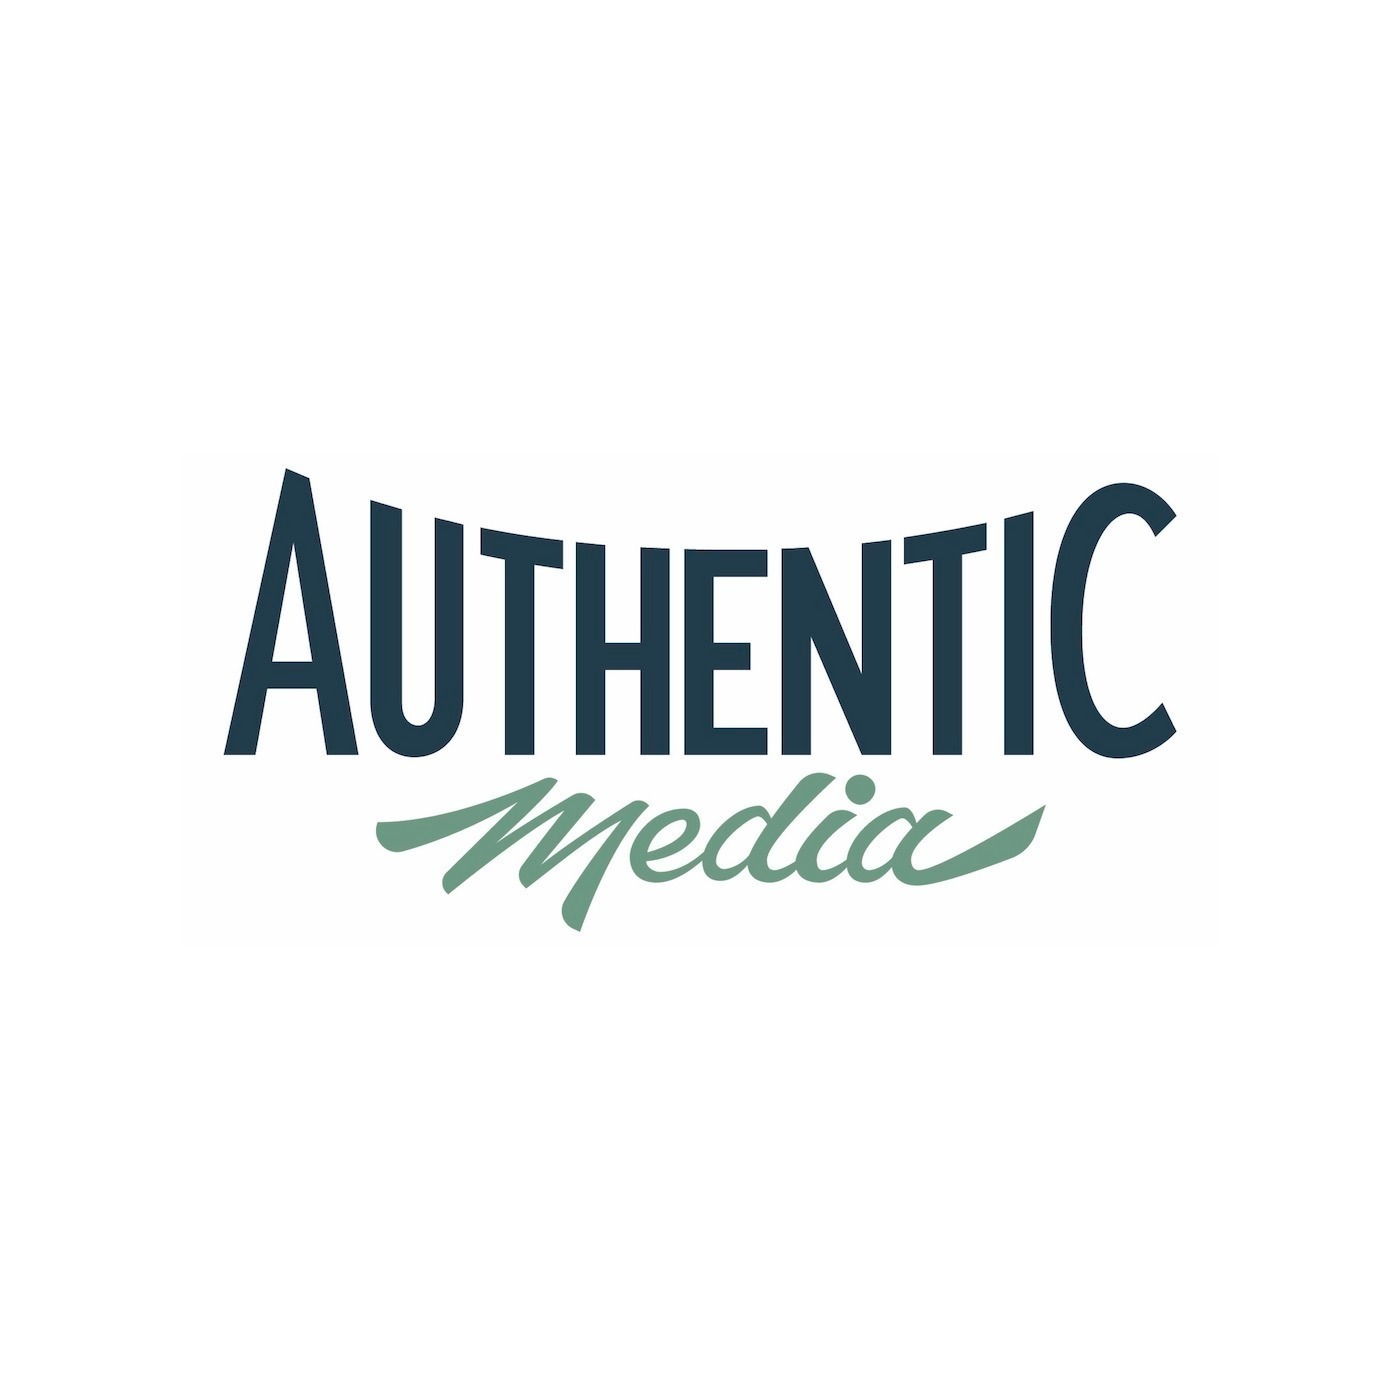 More Ways to Enjoy Military Aviation Content - Introducing Authentic Media